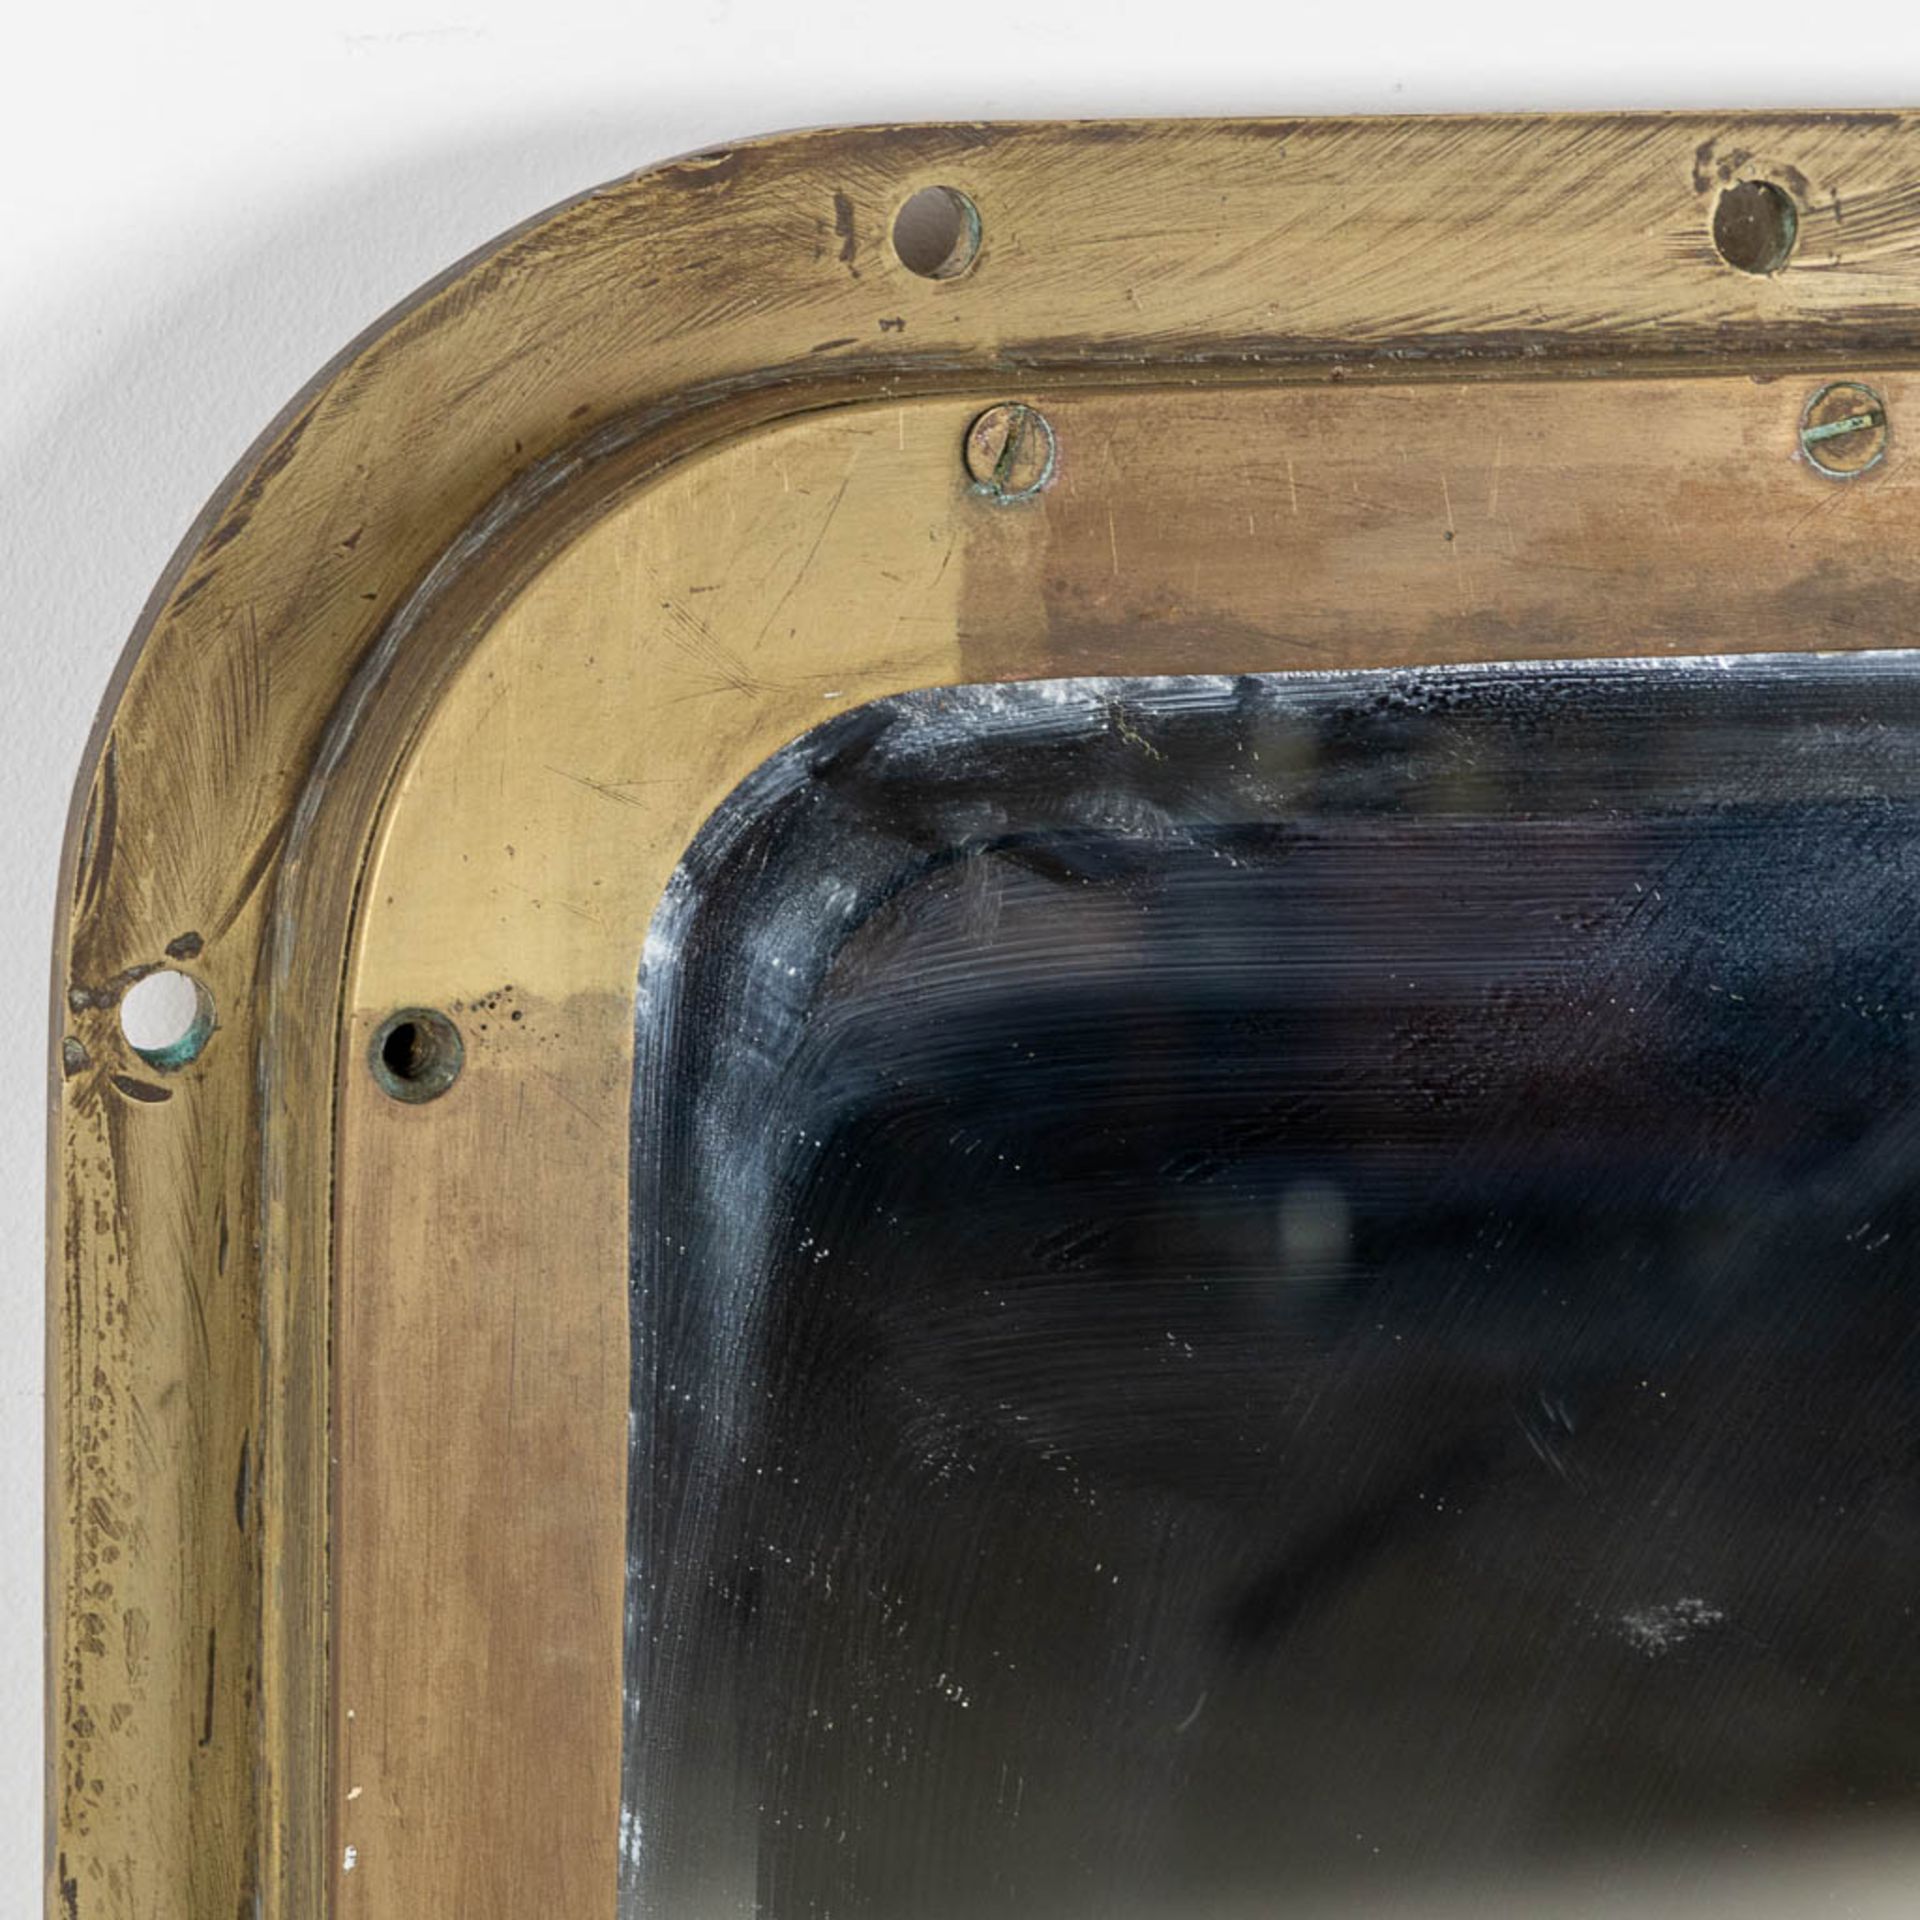 Three various Portholes, bronze and glass. Two changed into a mirror. (W:86 x H:110 cm) - Bild 4 aus 7